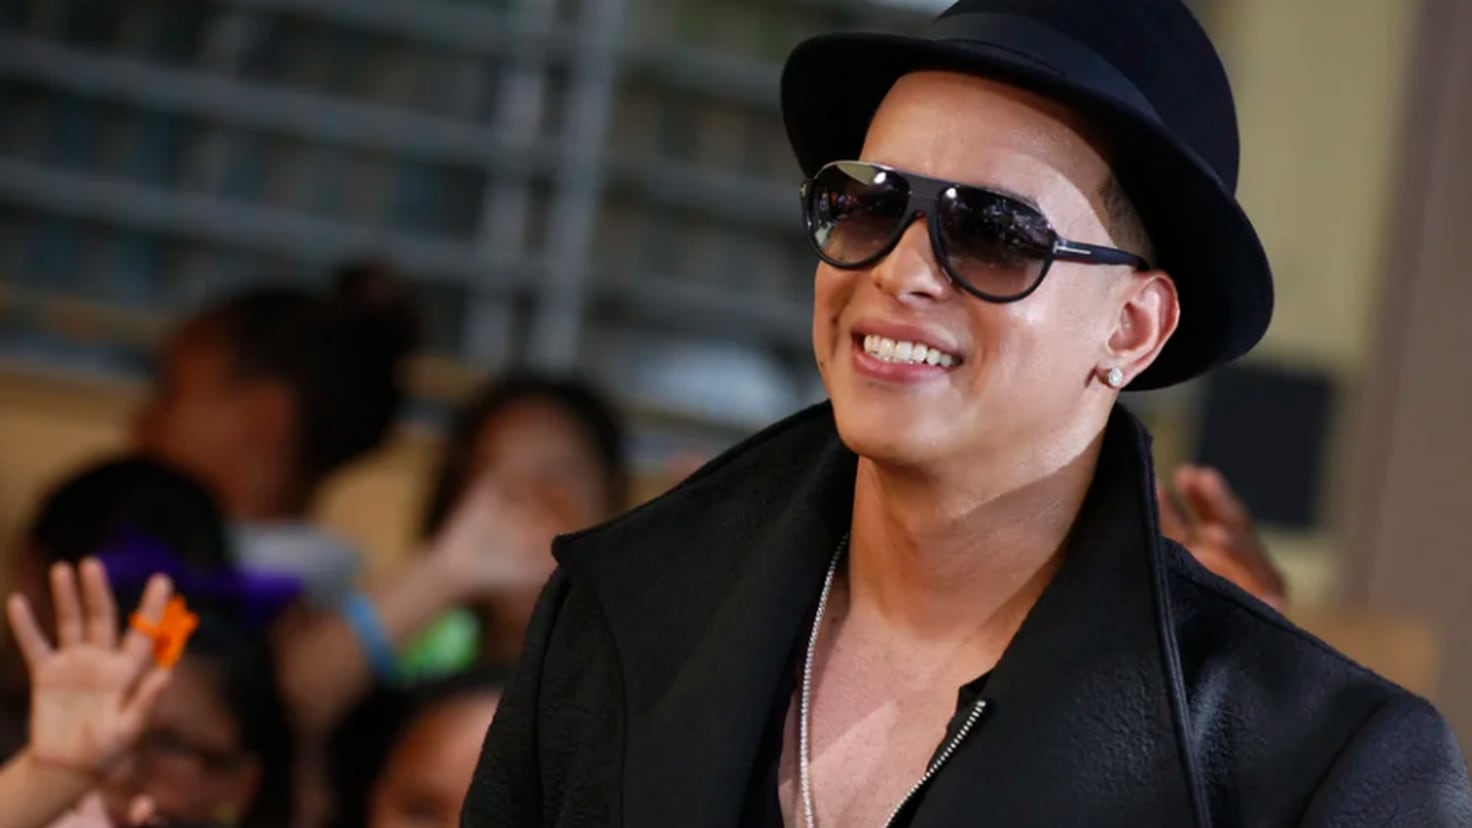 The lawyer who defended Daddy Yankee after the jewelry theft: My children got a surprise
